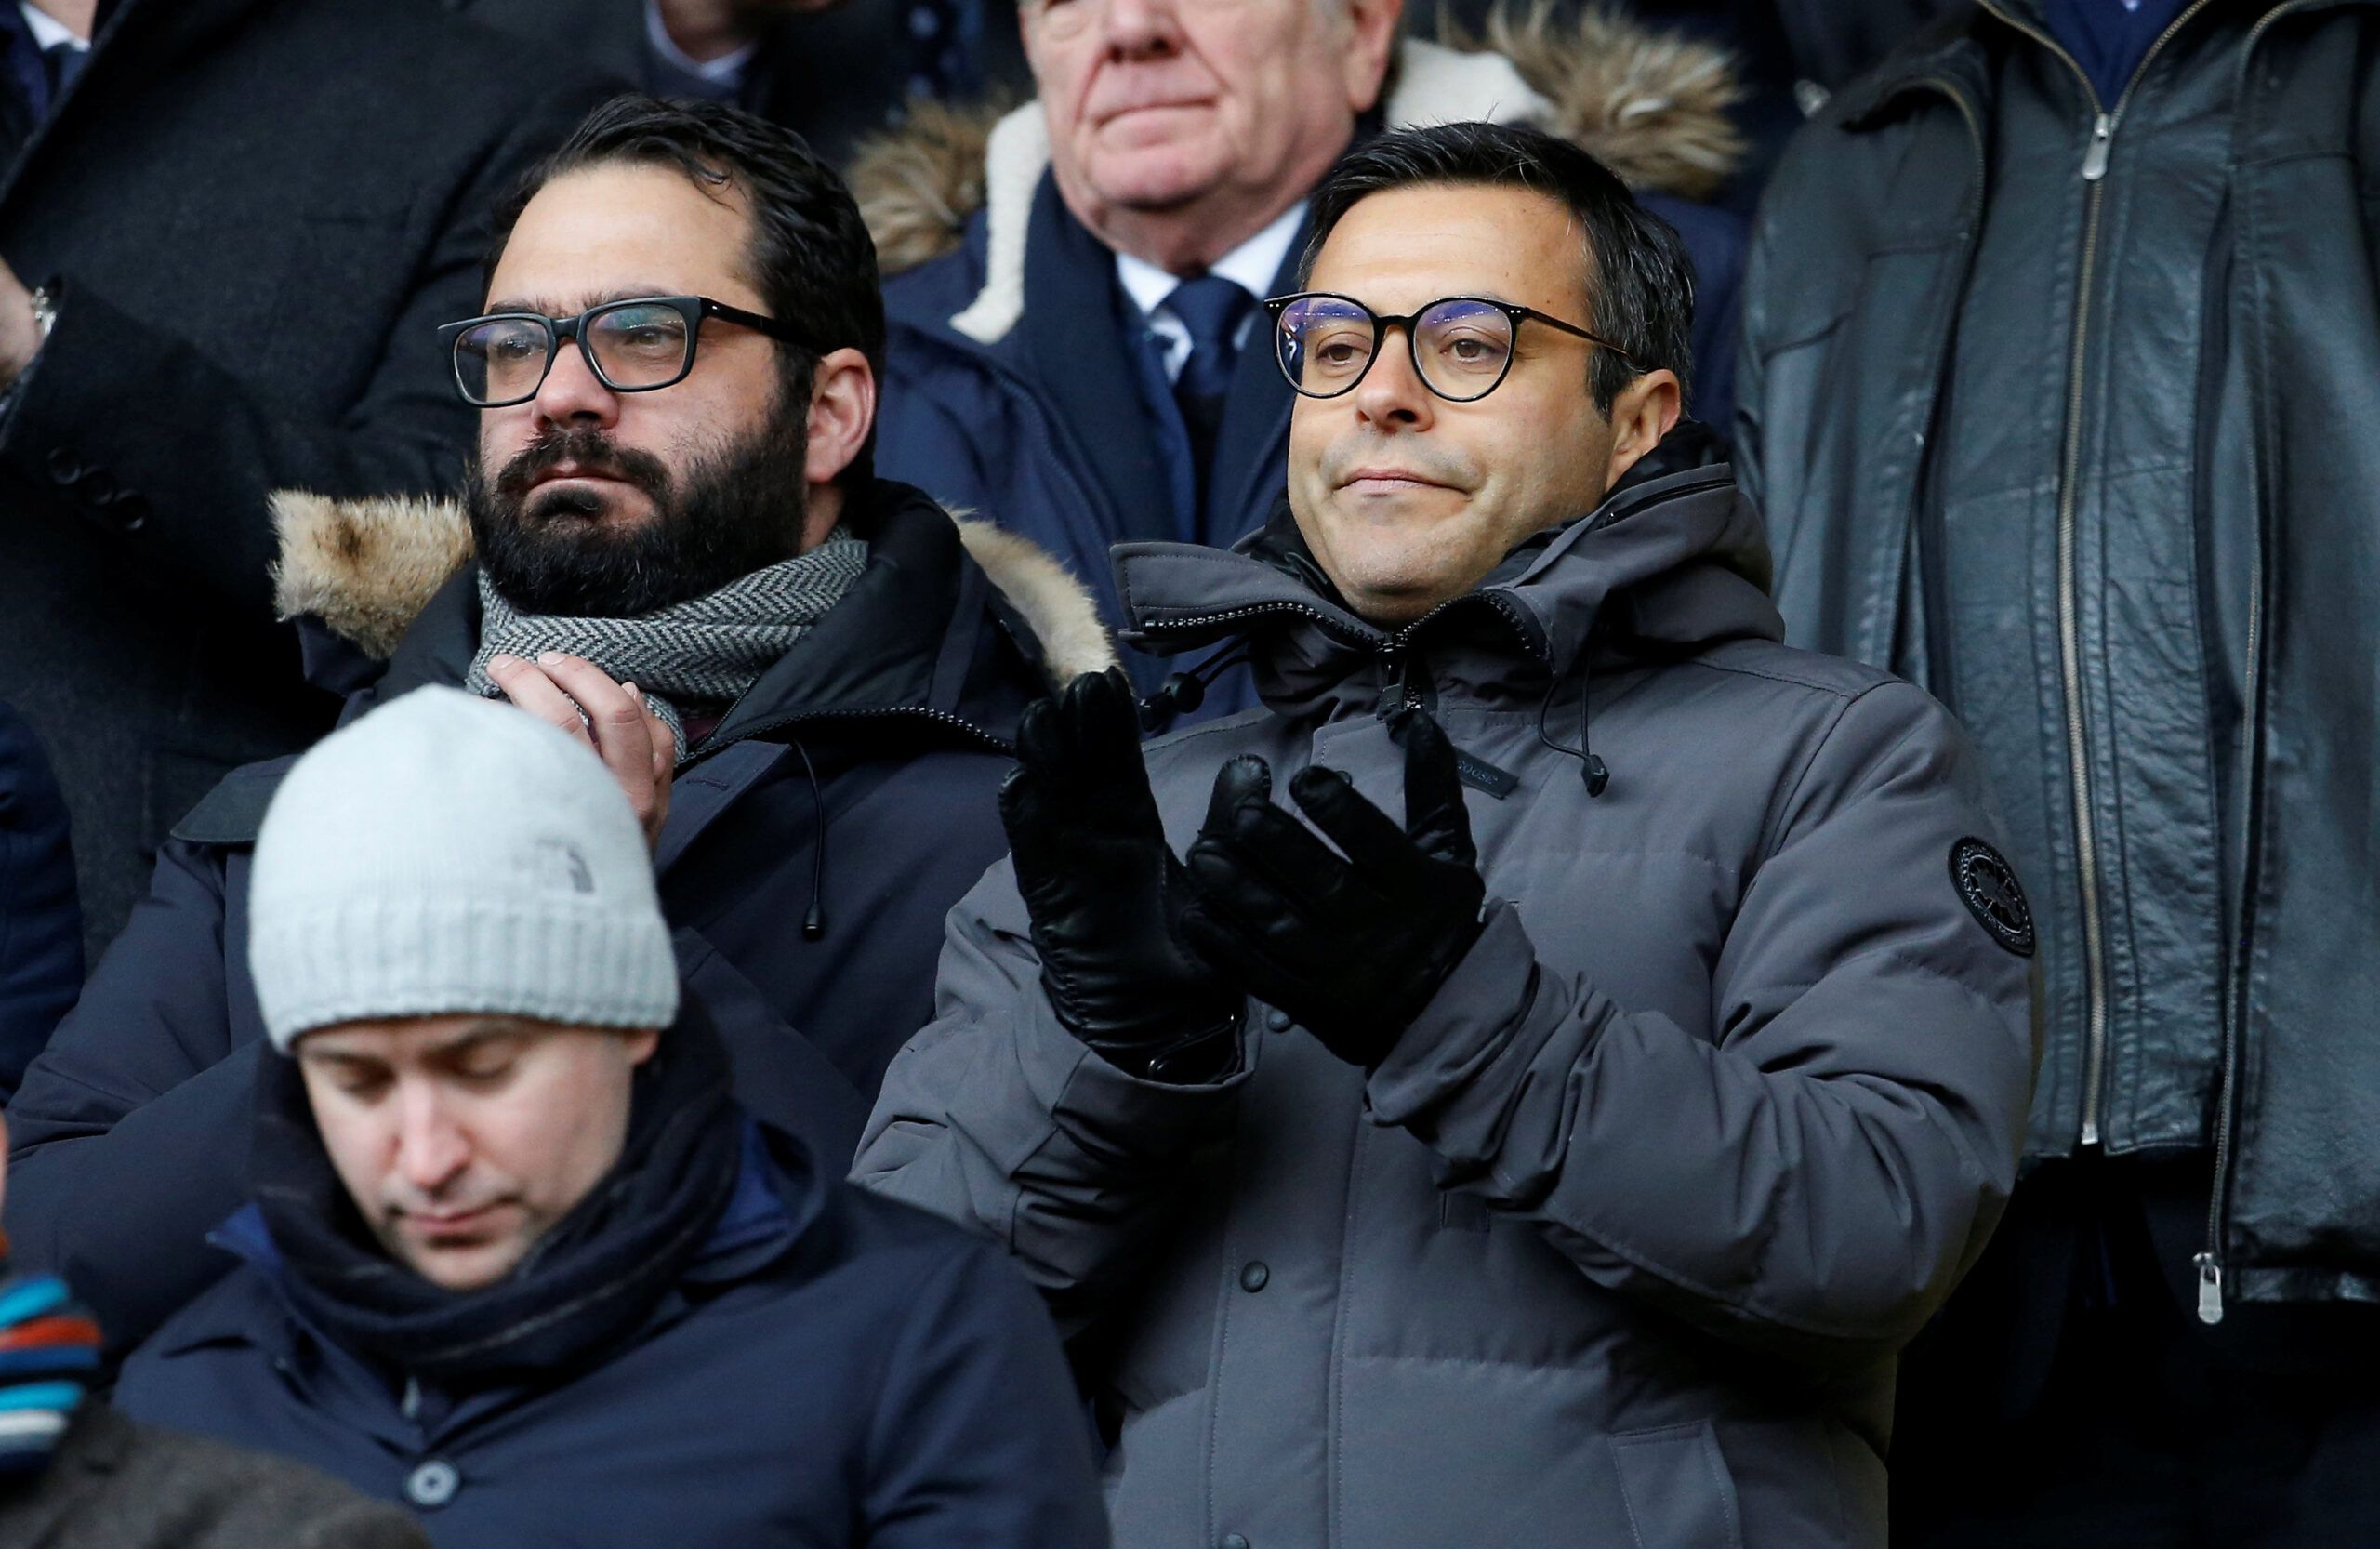 Leeds United chairman Andrea Radrizzani and director of football Victor Orta watching on